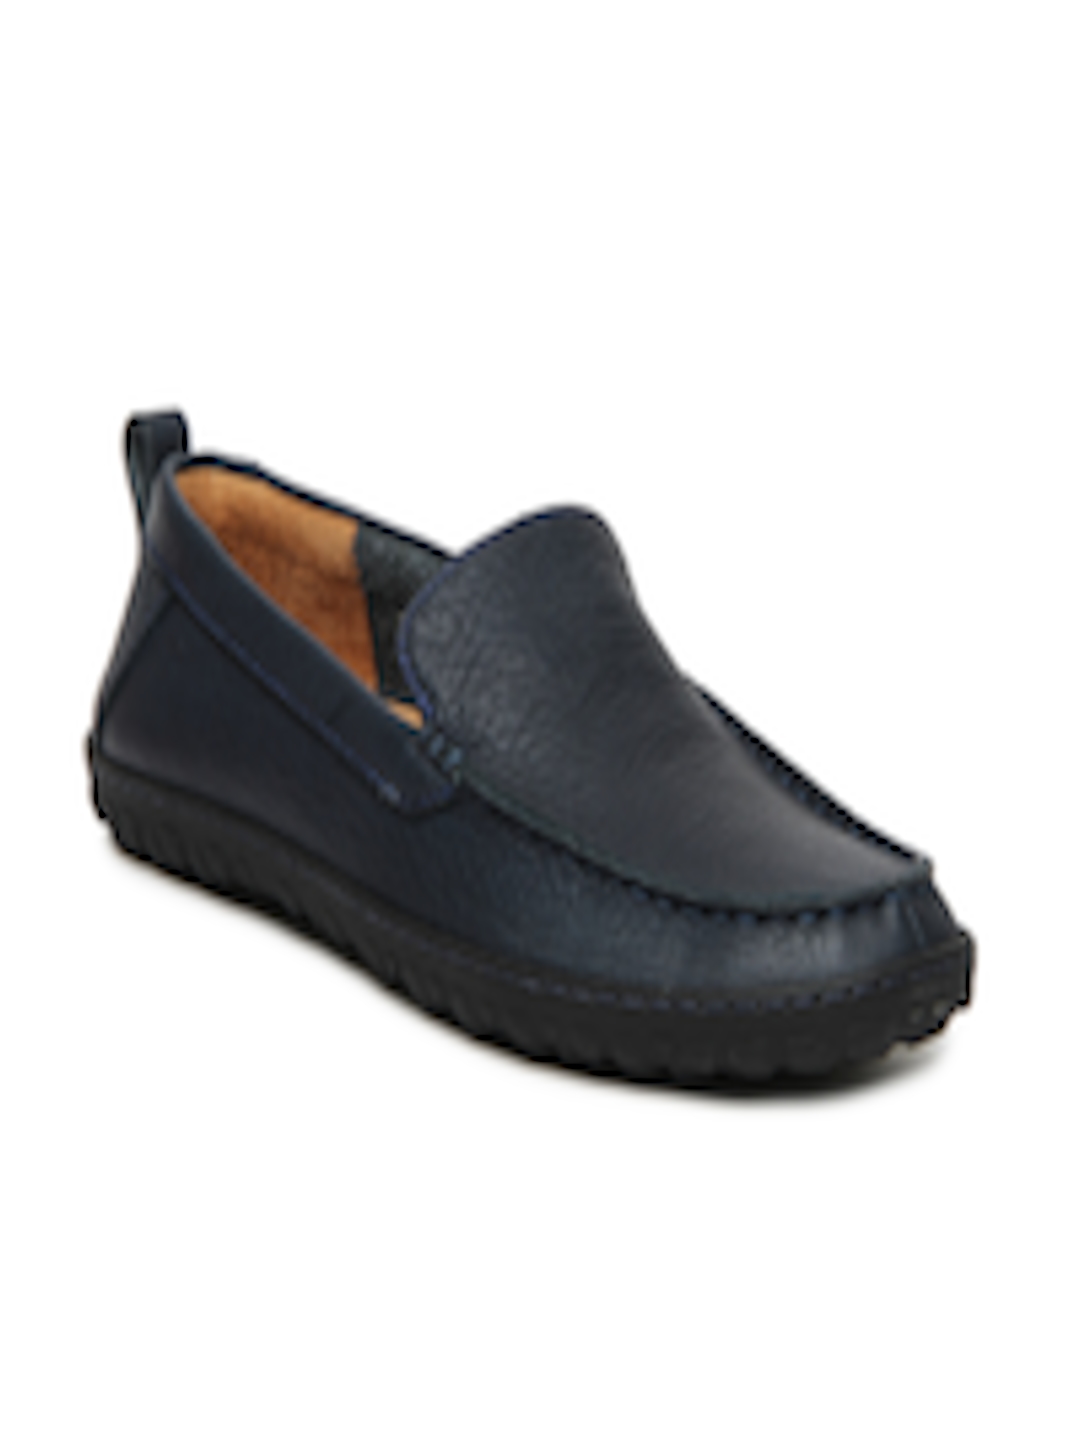 Buy Clarks Men Blue Leather Loafers - Casual Shoes for Men 268203 | Myntra